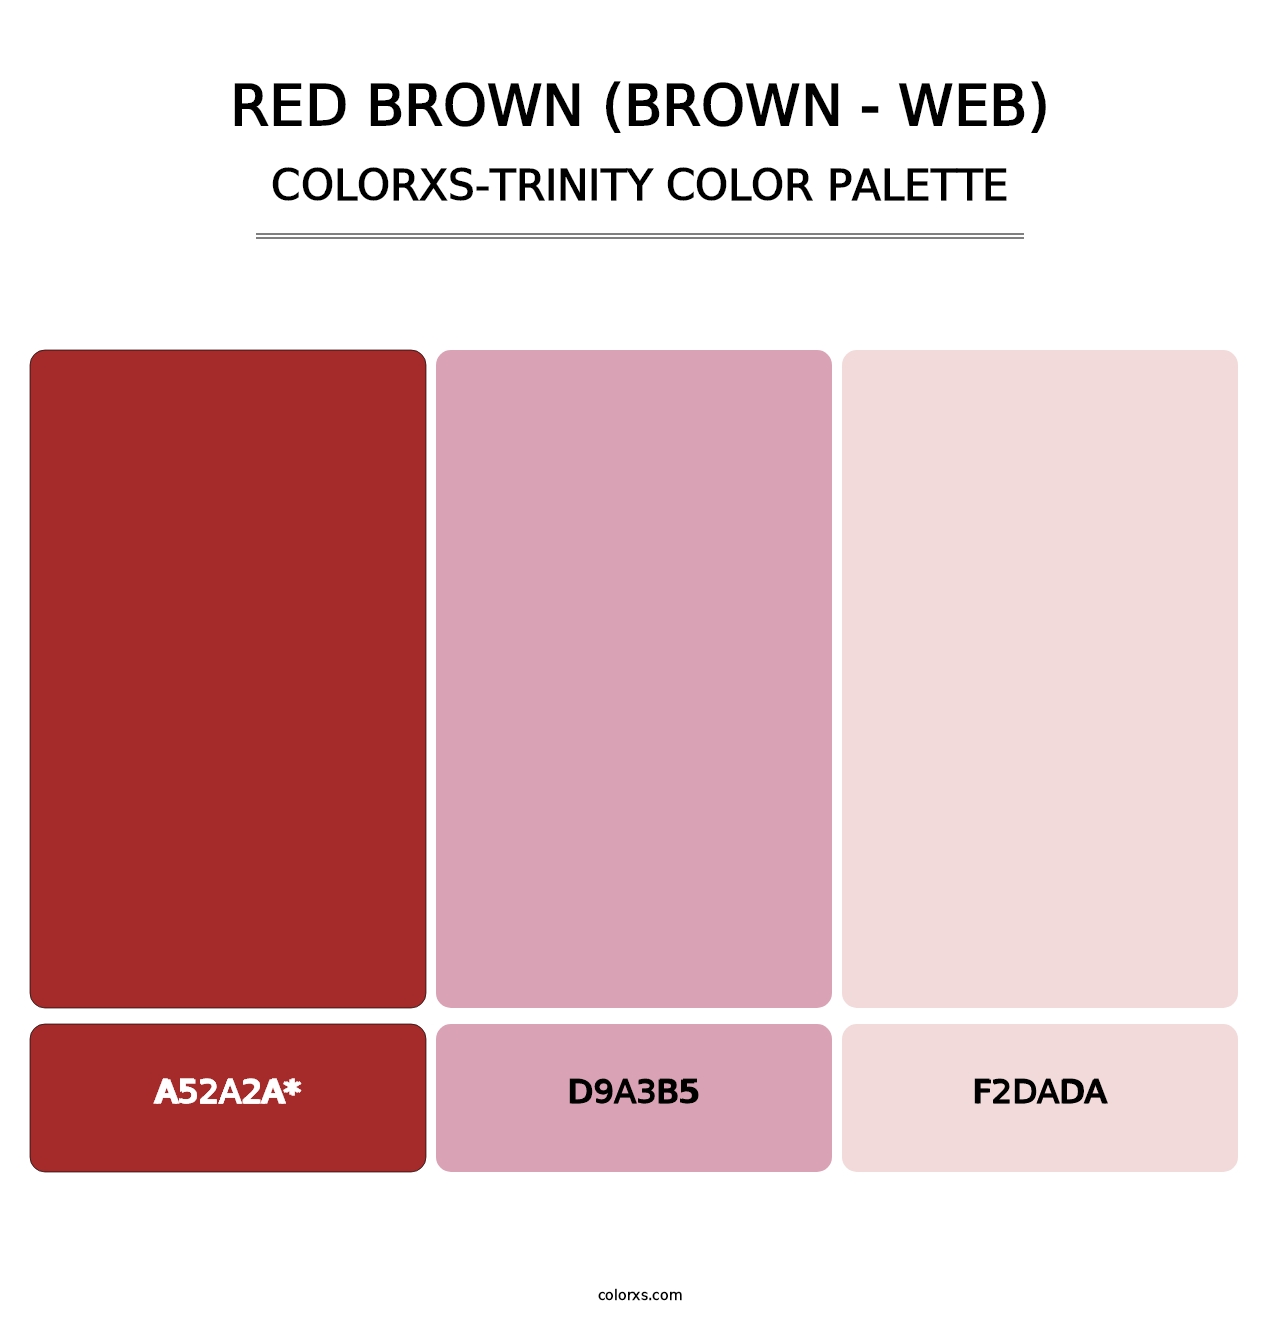 Red Brown (Brown - Web) - Colorxs Trinity Palette